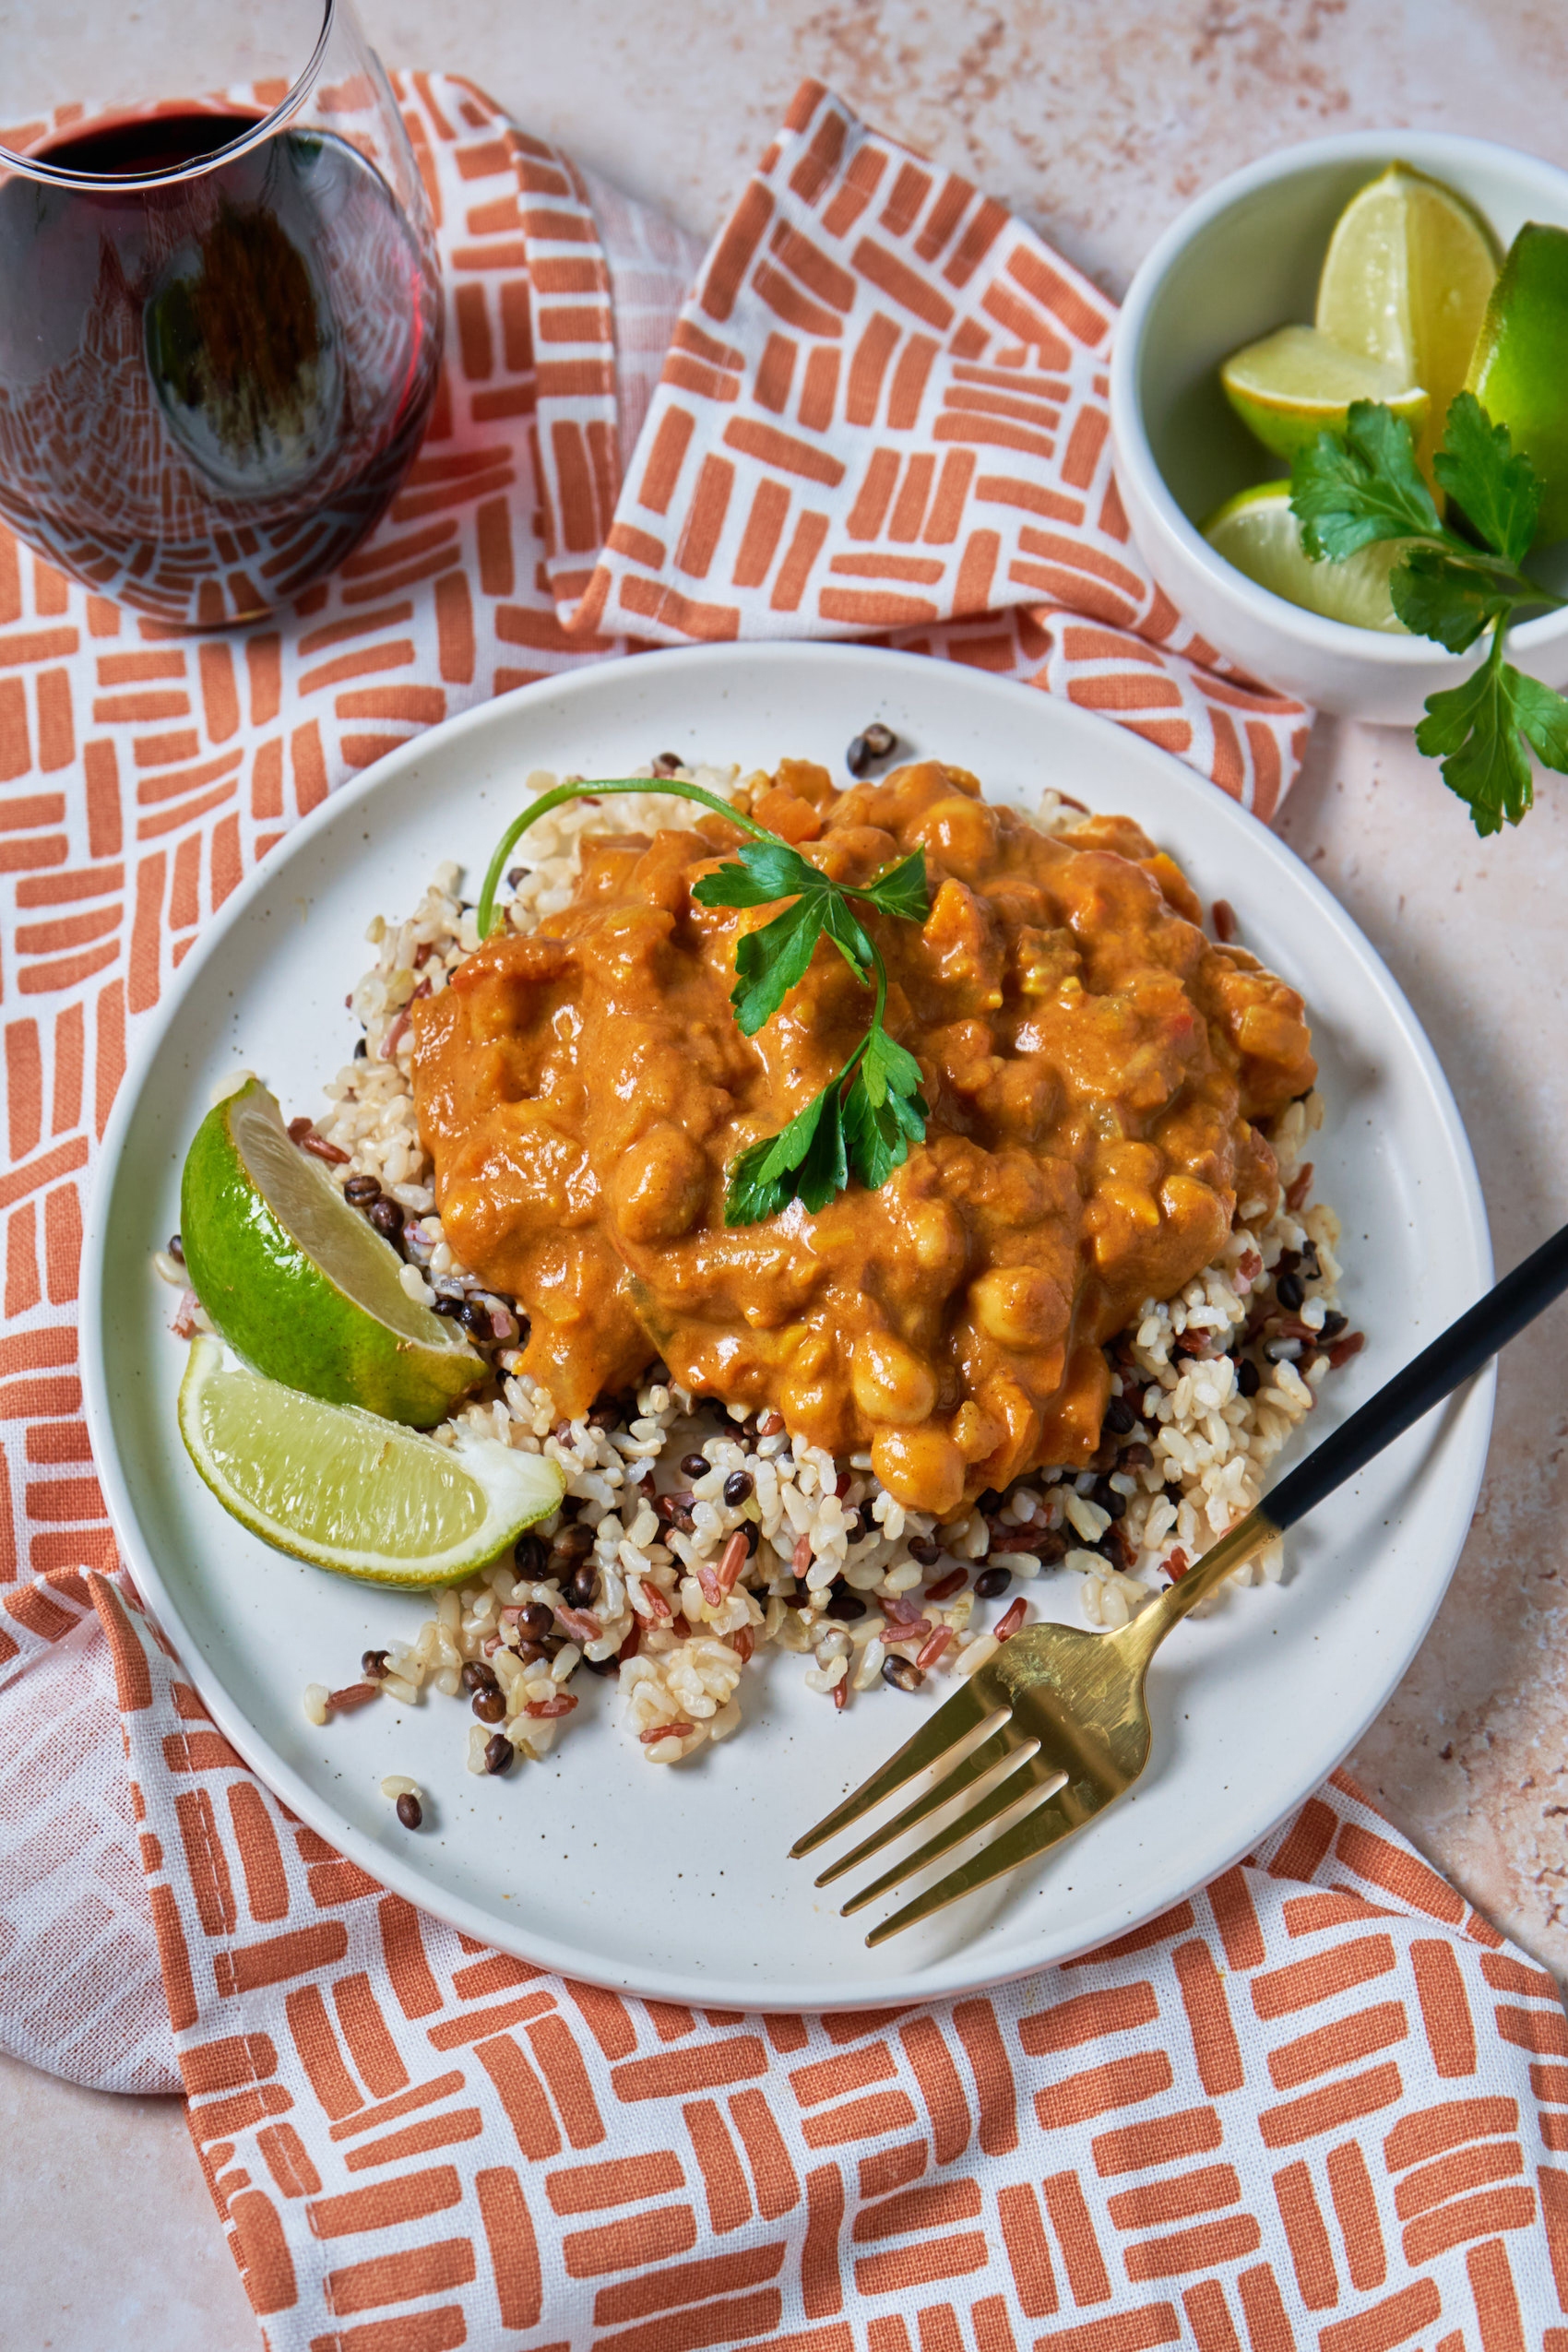 a plate of chickpea curry served over grains with a wedge of lime